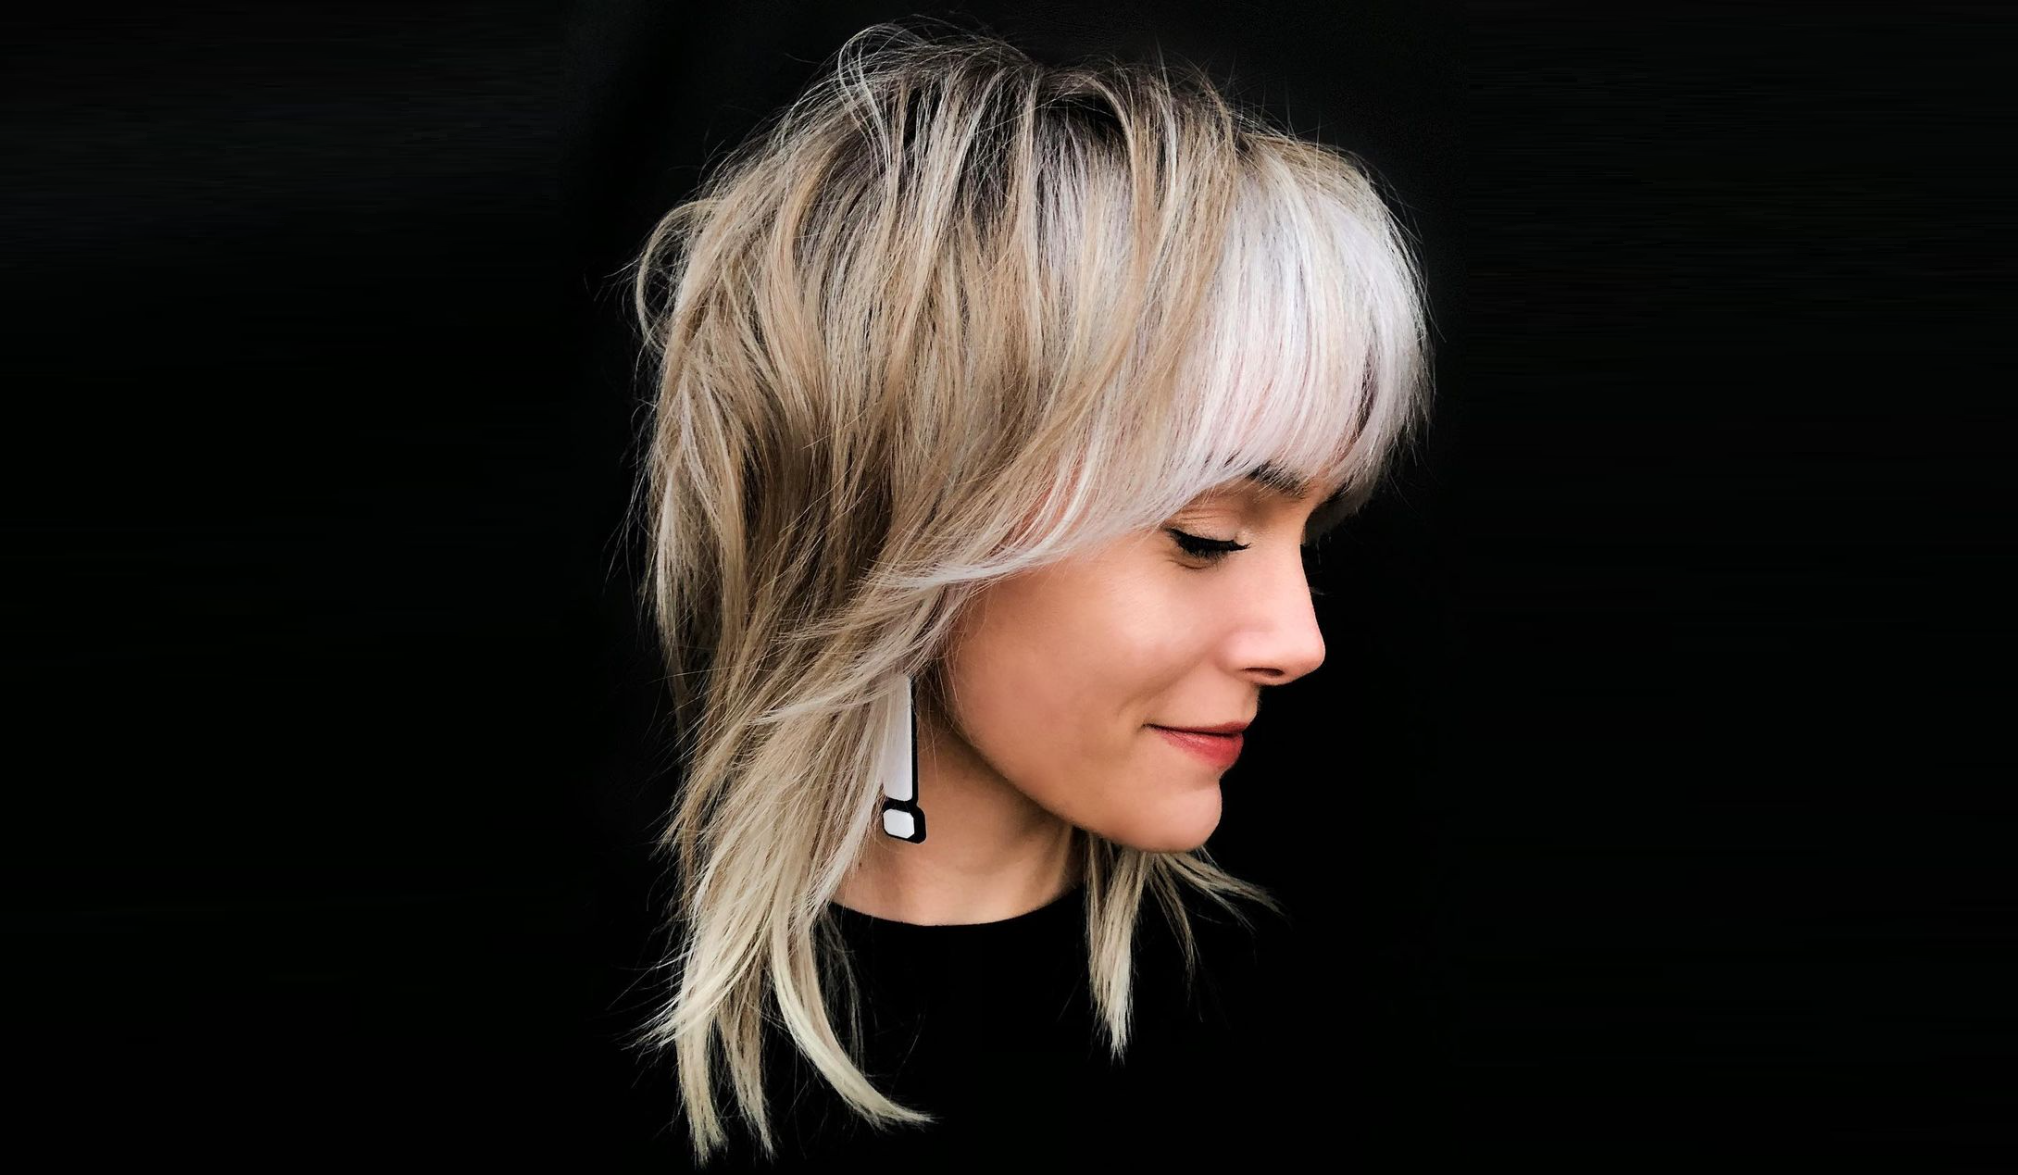 The wolf cut is one of the most versatile hairstyles. It works well for both round and square faces. The active layers make a look appear harmonious.